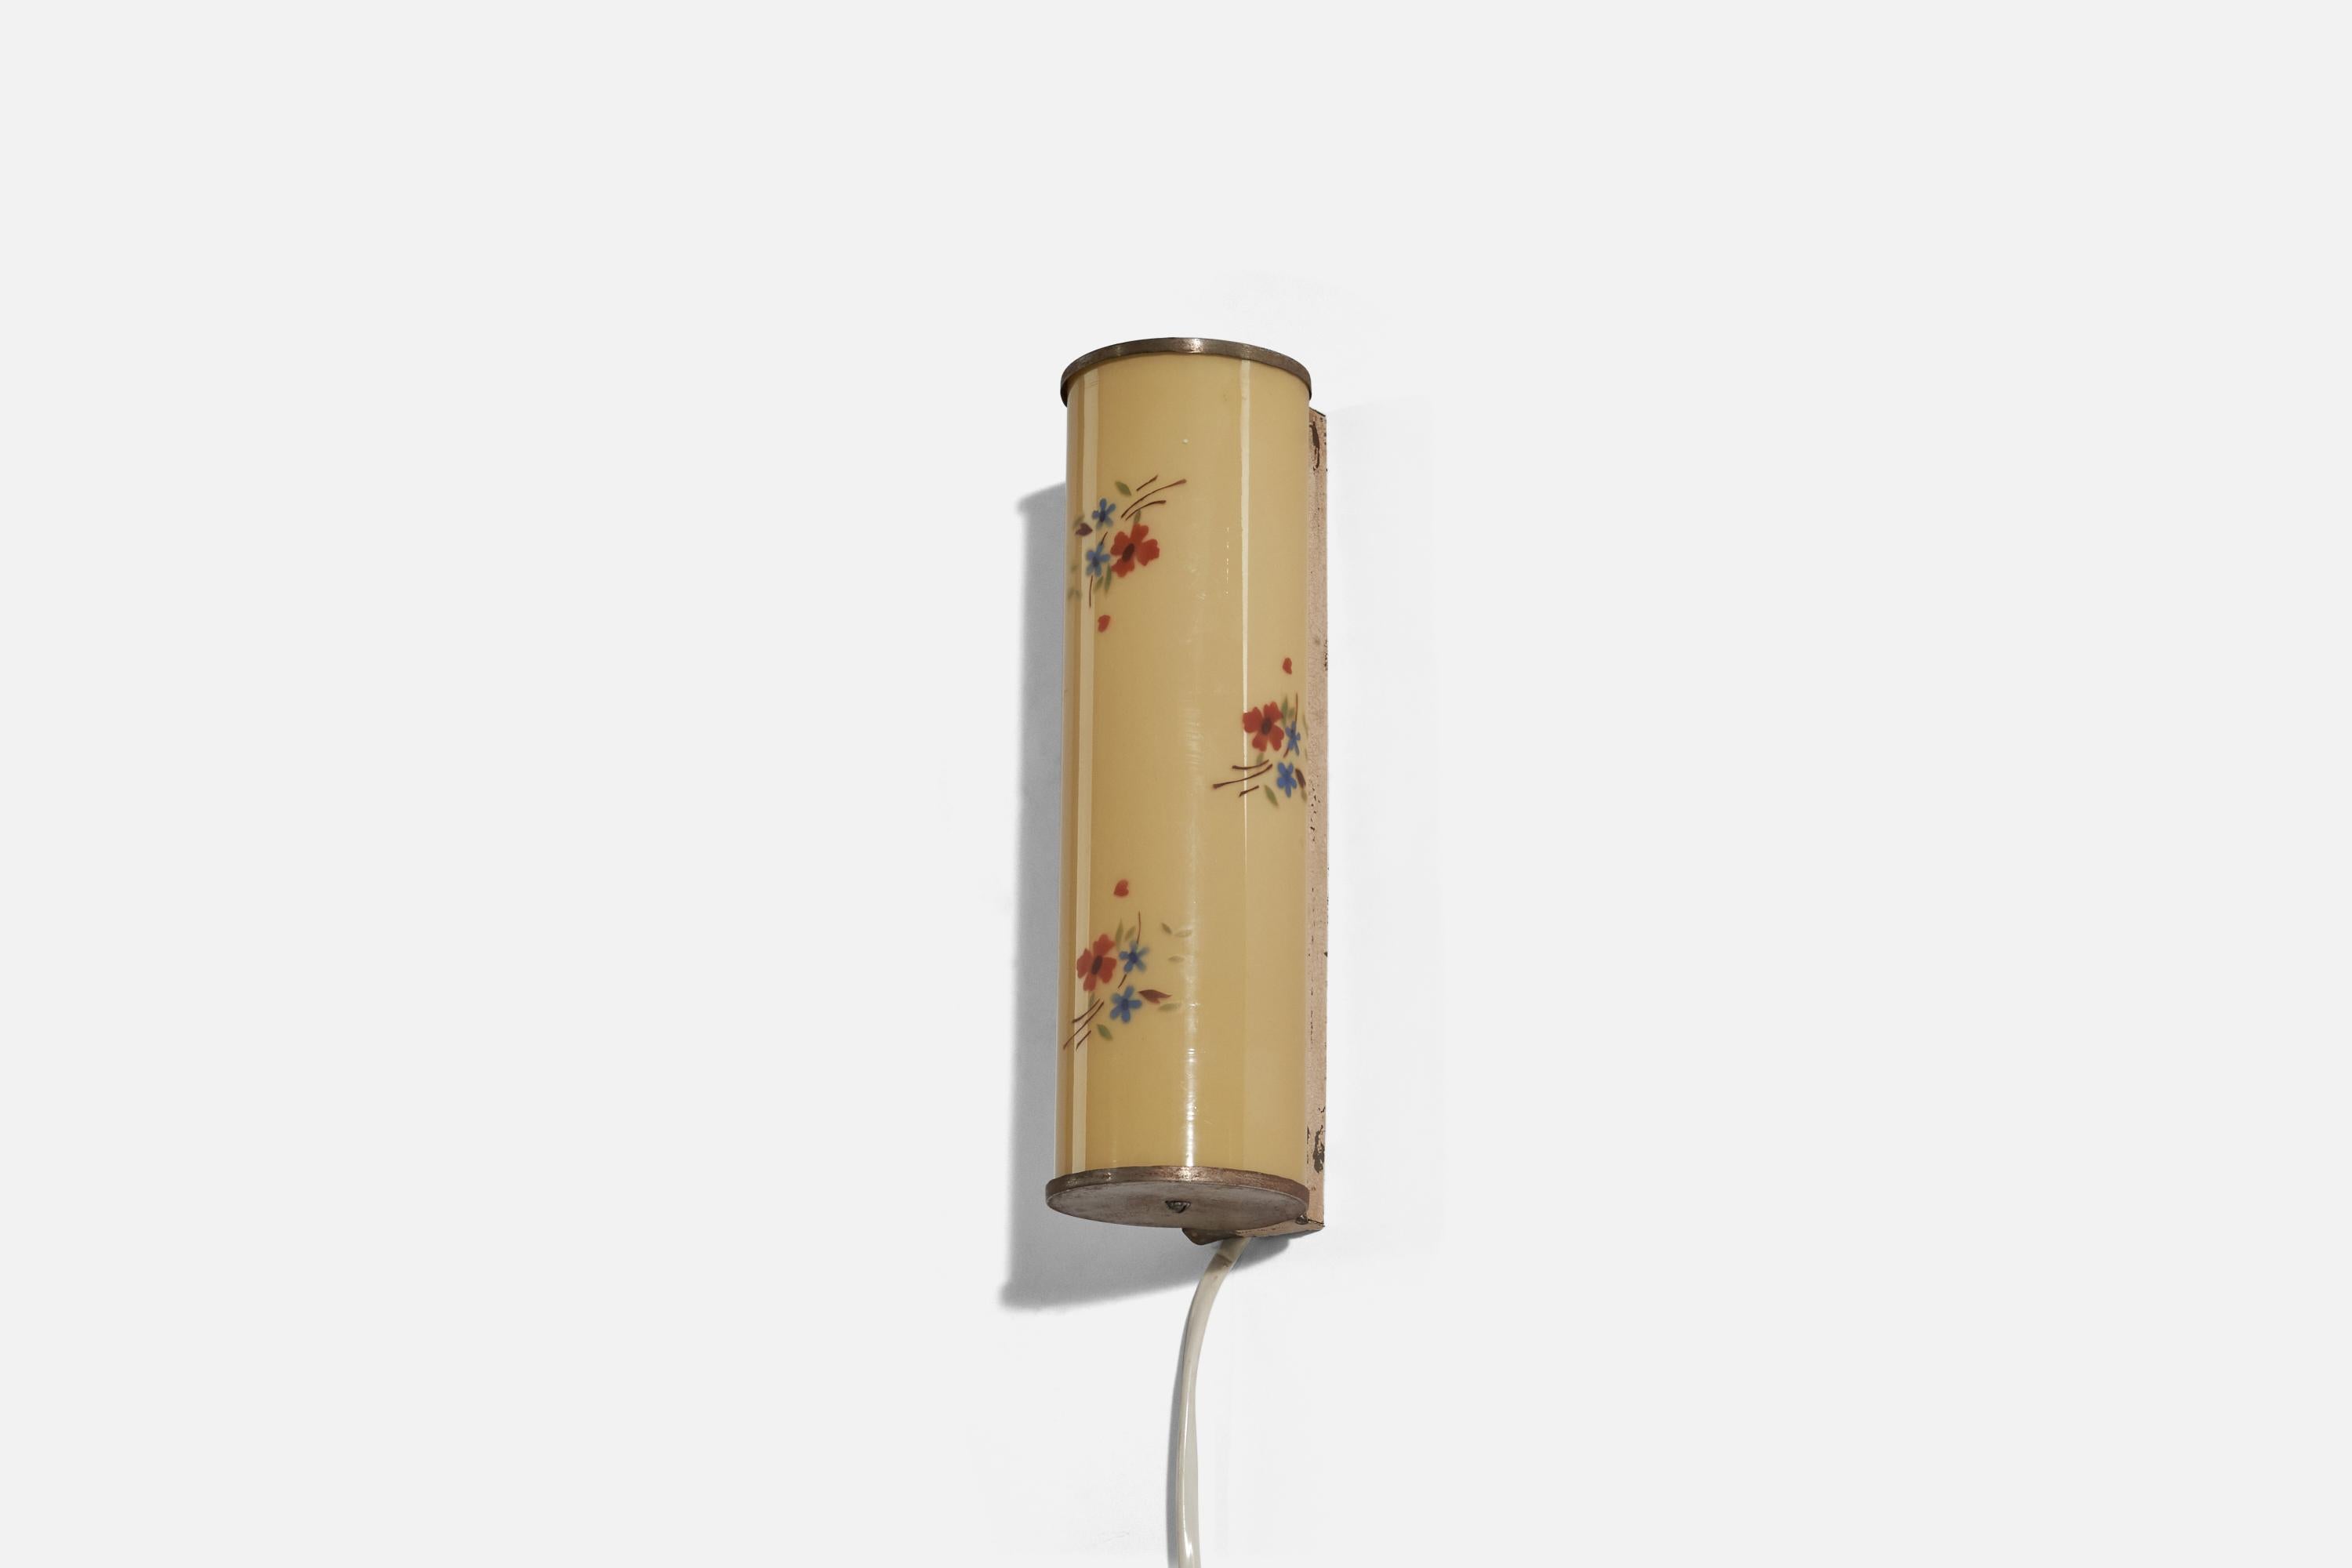 A brass and yellow glass with flowers sconce / wall light designed and produced in Sweden, c. 1940s.

Dimensions of back plate (inches) : 9.12 x 1.56 x 0.43 (Height x Width x Depth).

Socket takes E-14 bulb.
There is no maximum wattage stated